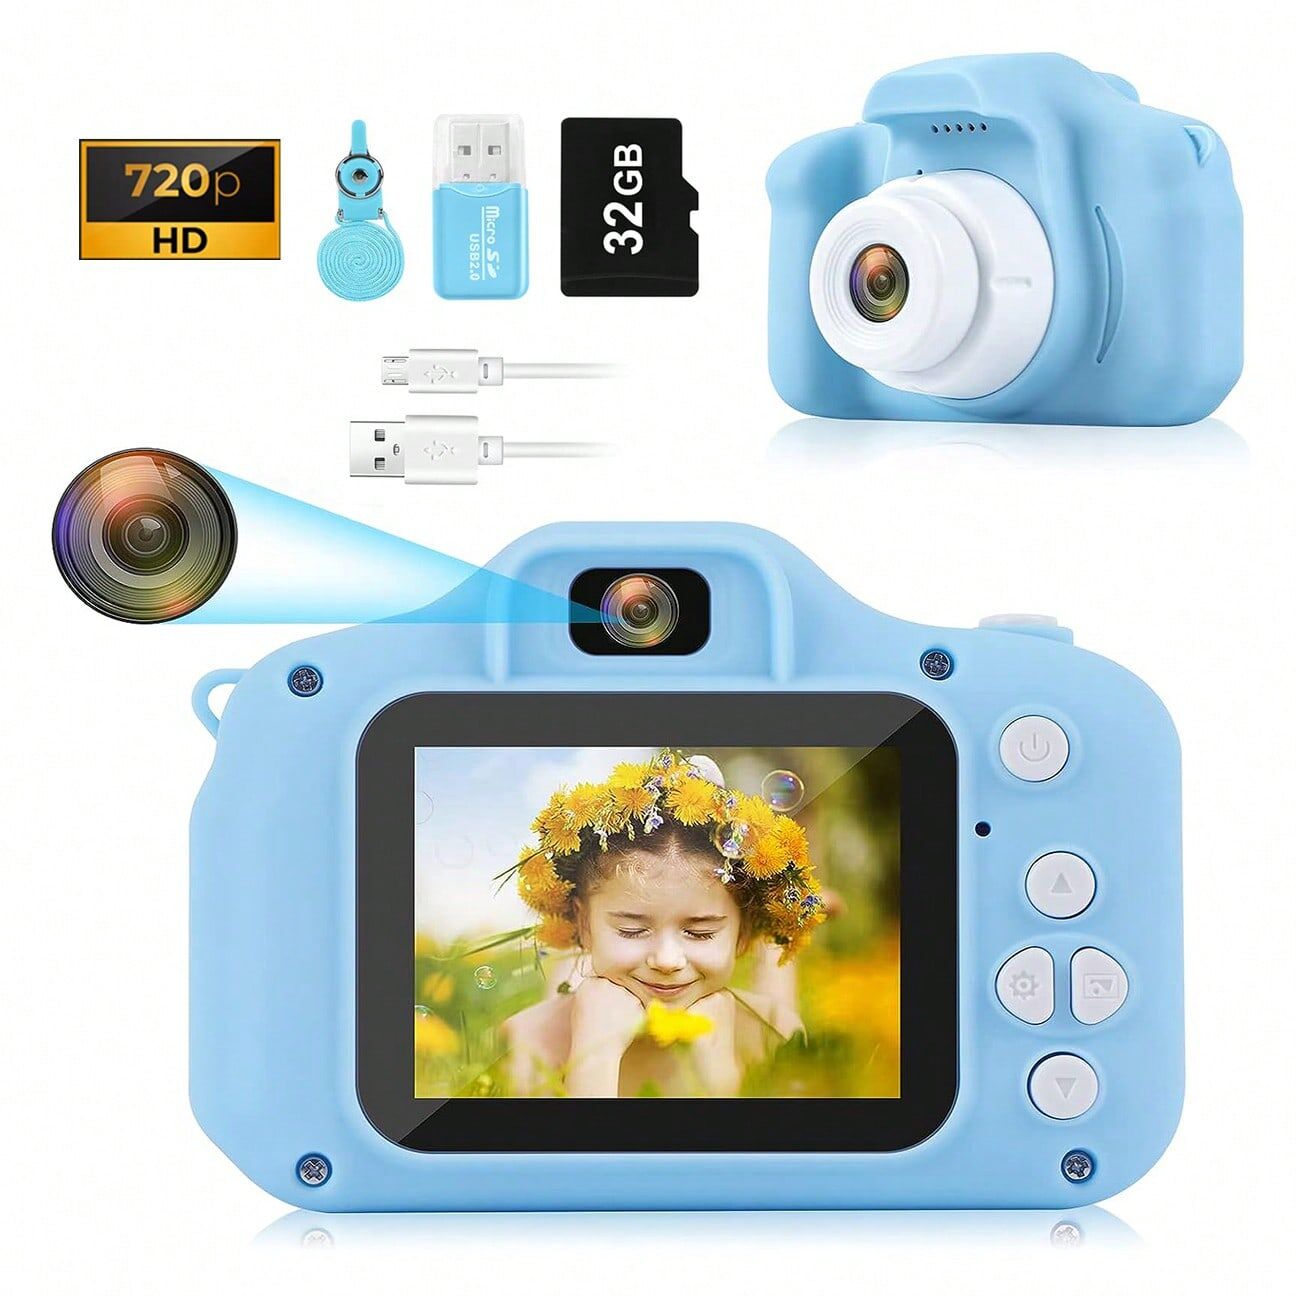 SHEIN 720P HD Blue Kids Digital Video Selfie Camera Portable Toy With 32GB SD Card For Toddler Christmas Birthday Gifts 3 4 5 6 7 8 Year Old Boys 1pc Blue one-size